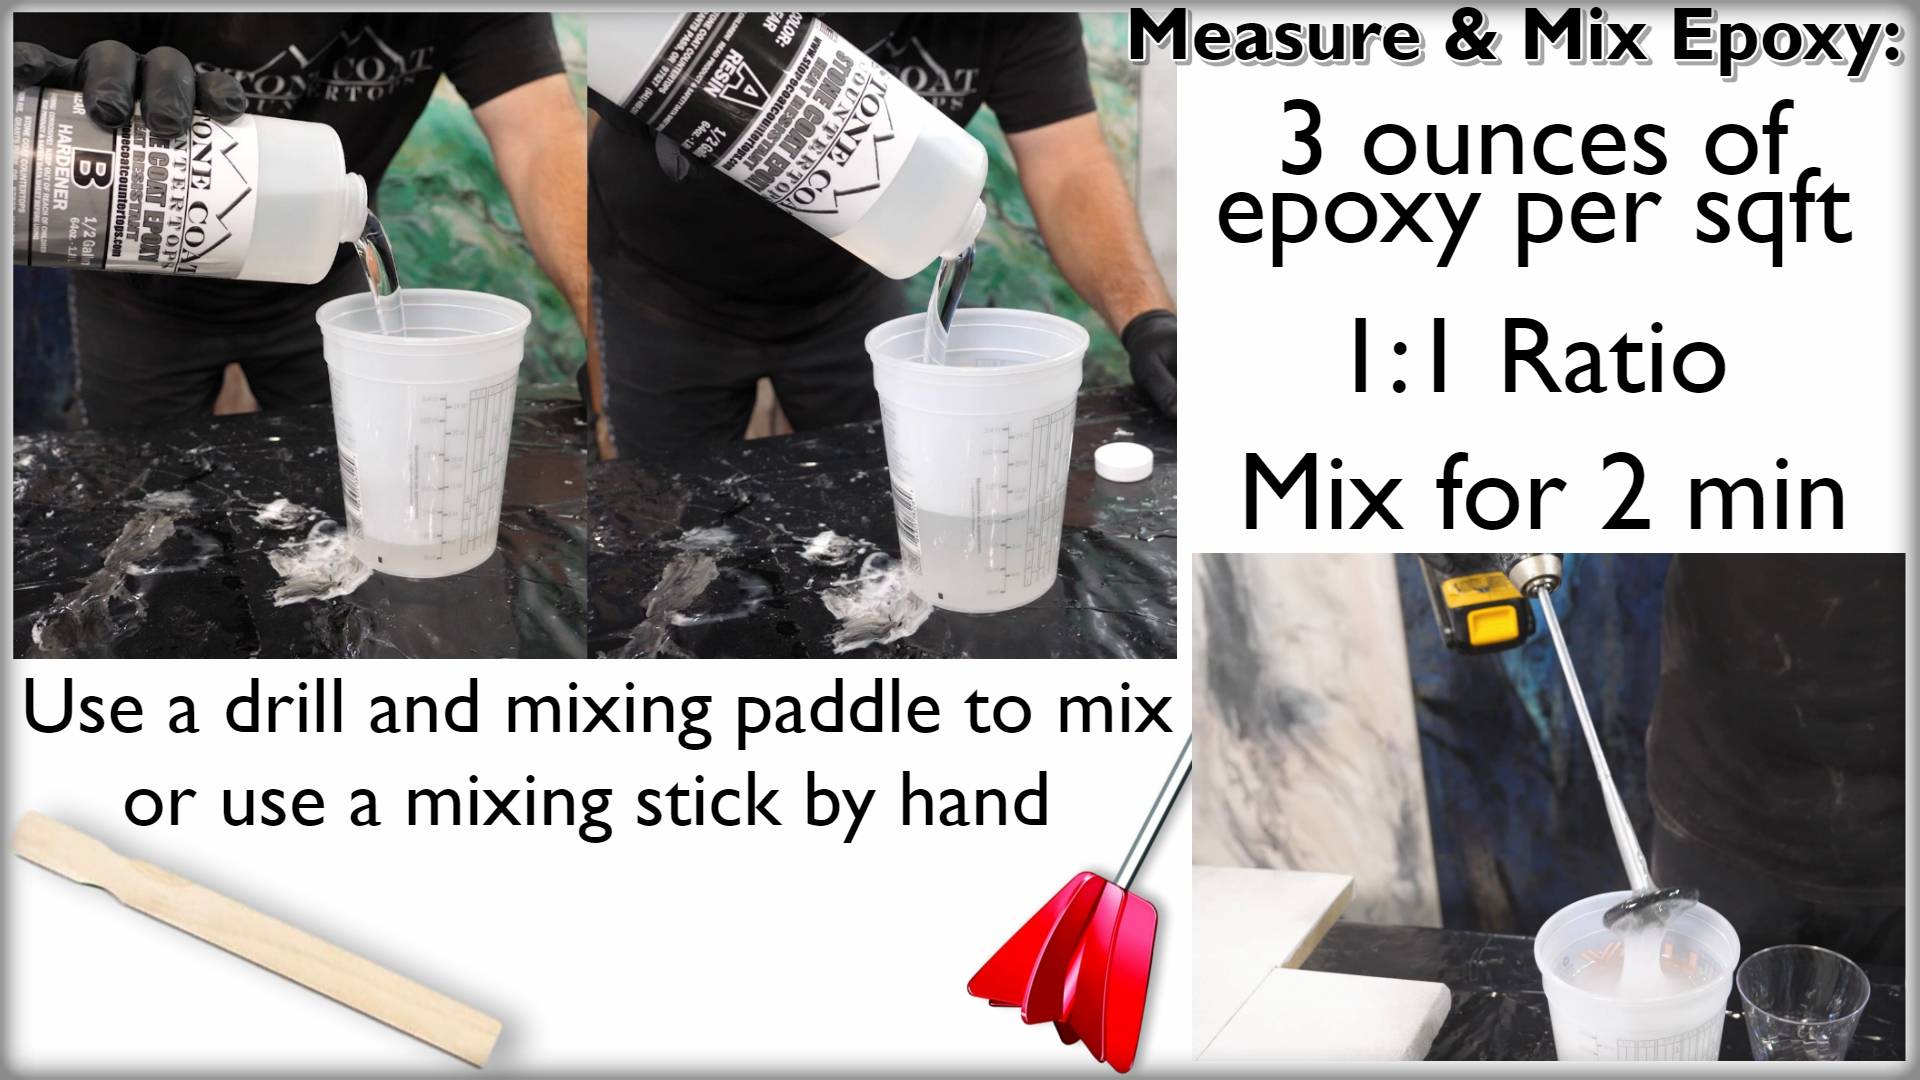 Measure and Mix Epoxy: 3 ounces of epoxy per sqft. Mix for 2 min using a drill and mixing paddle or a mixing stick by hand.